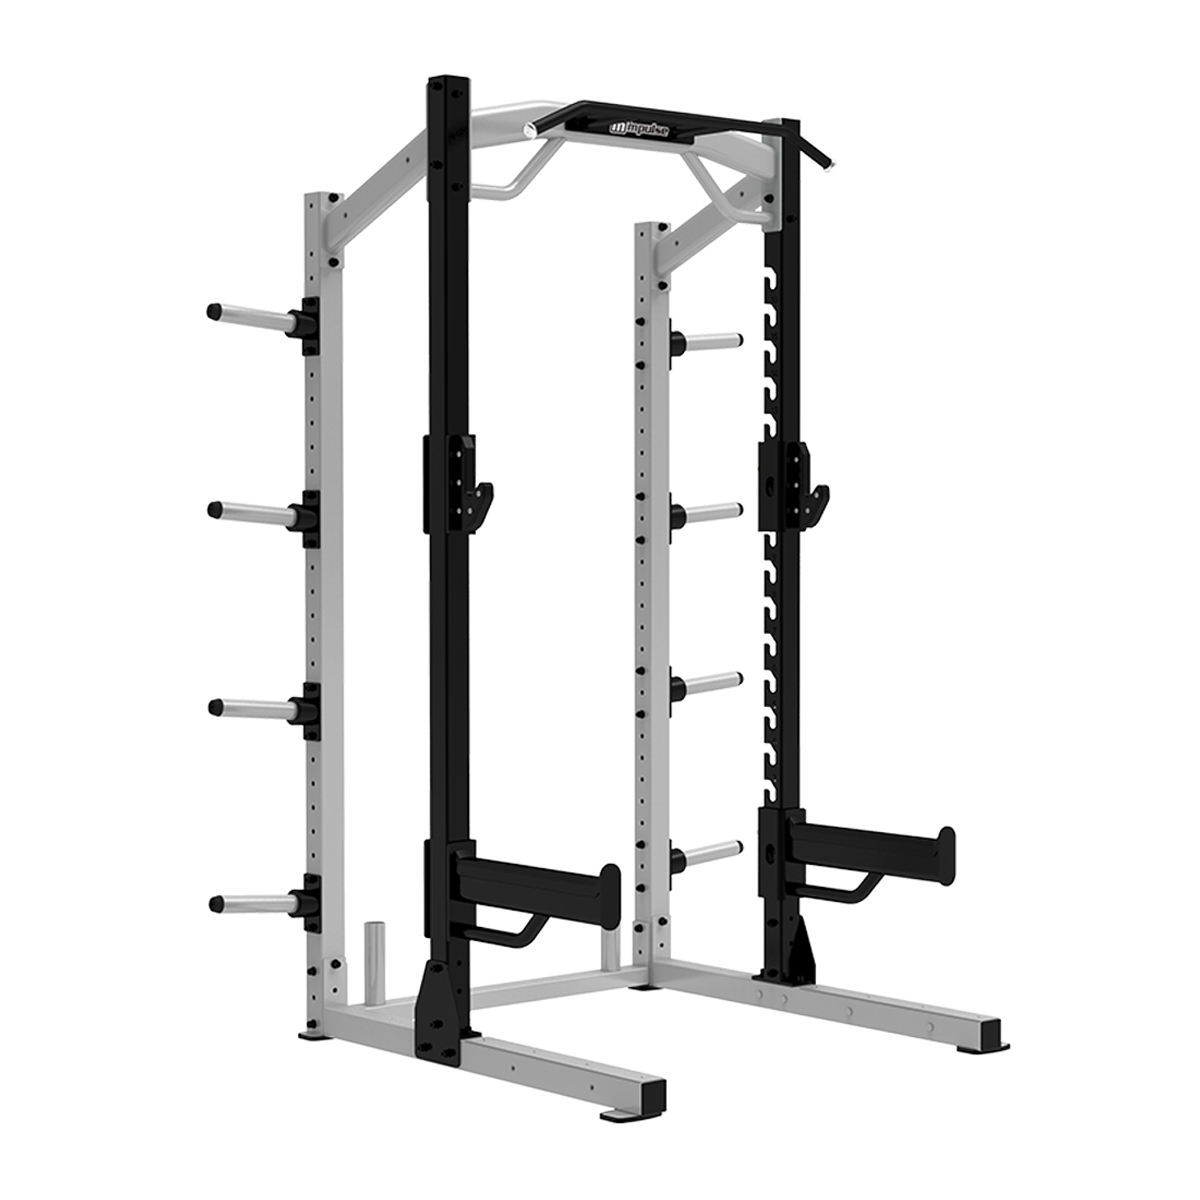 SE HALF CAGE WITH STAND-SINGLE WEIGHT STORAGE